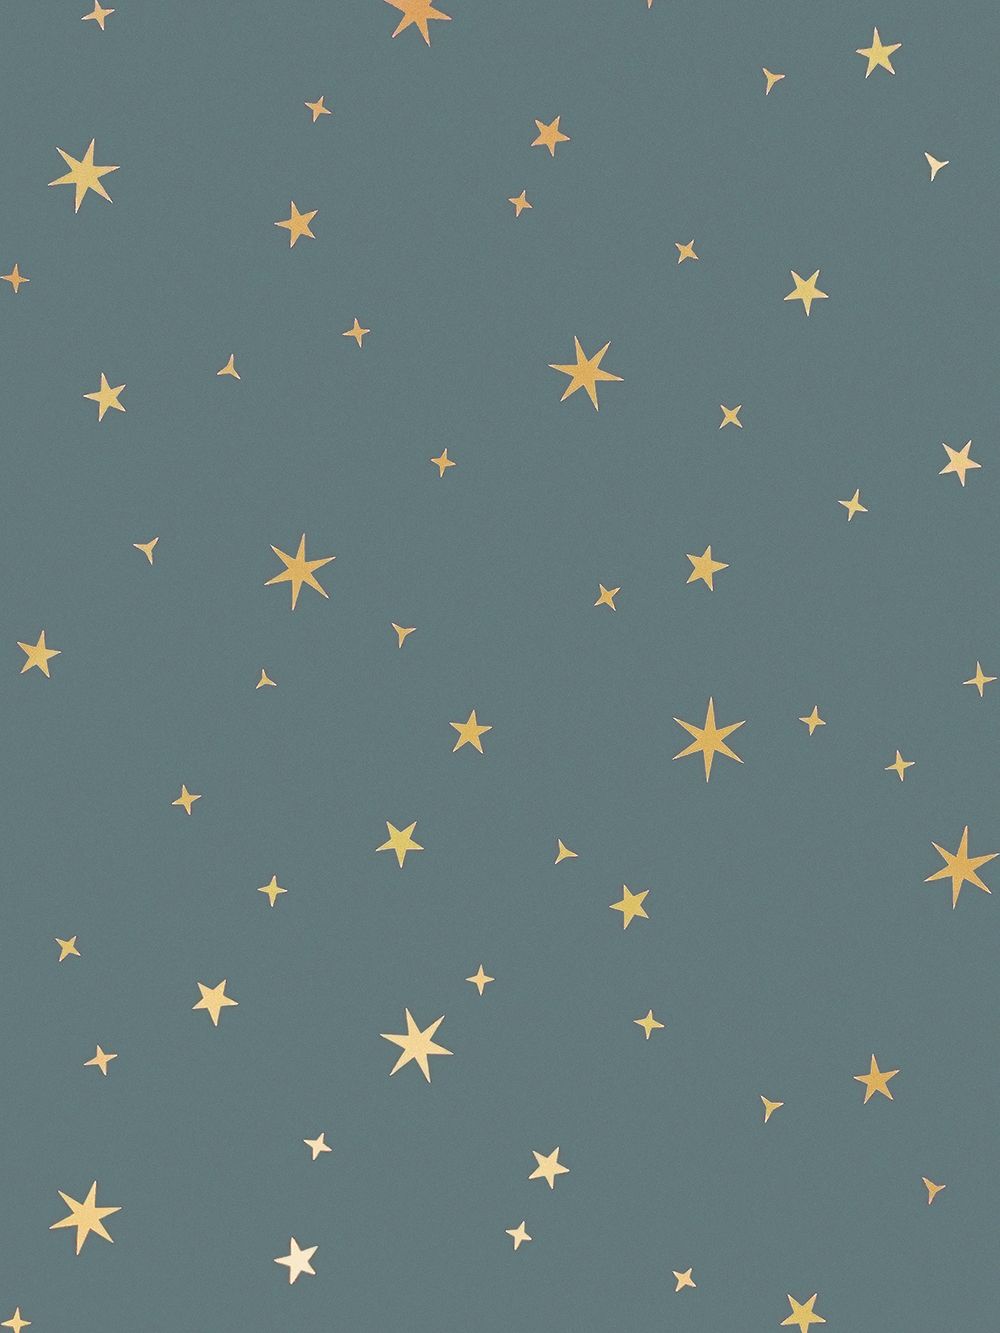 Stars wallpaper in a choice of 4 colourways - Stars